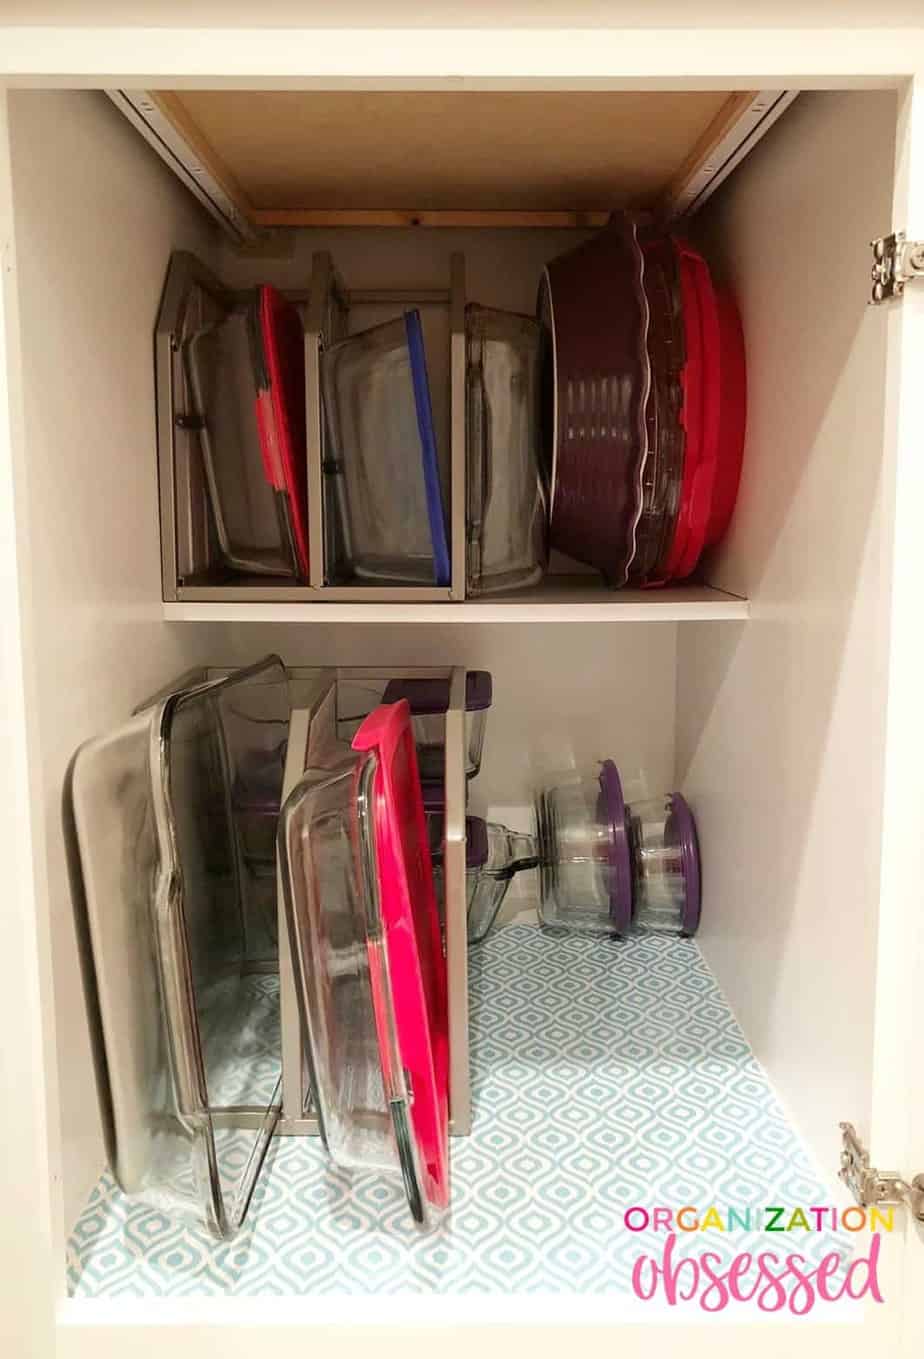 https://www.organizationobsessed.com/wp-content/uploads/how-to-organize-baking-dishes-2.jpg